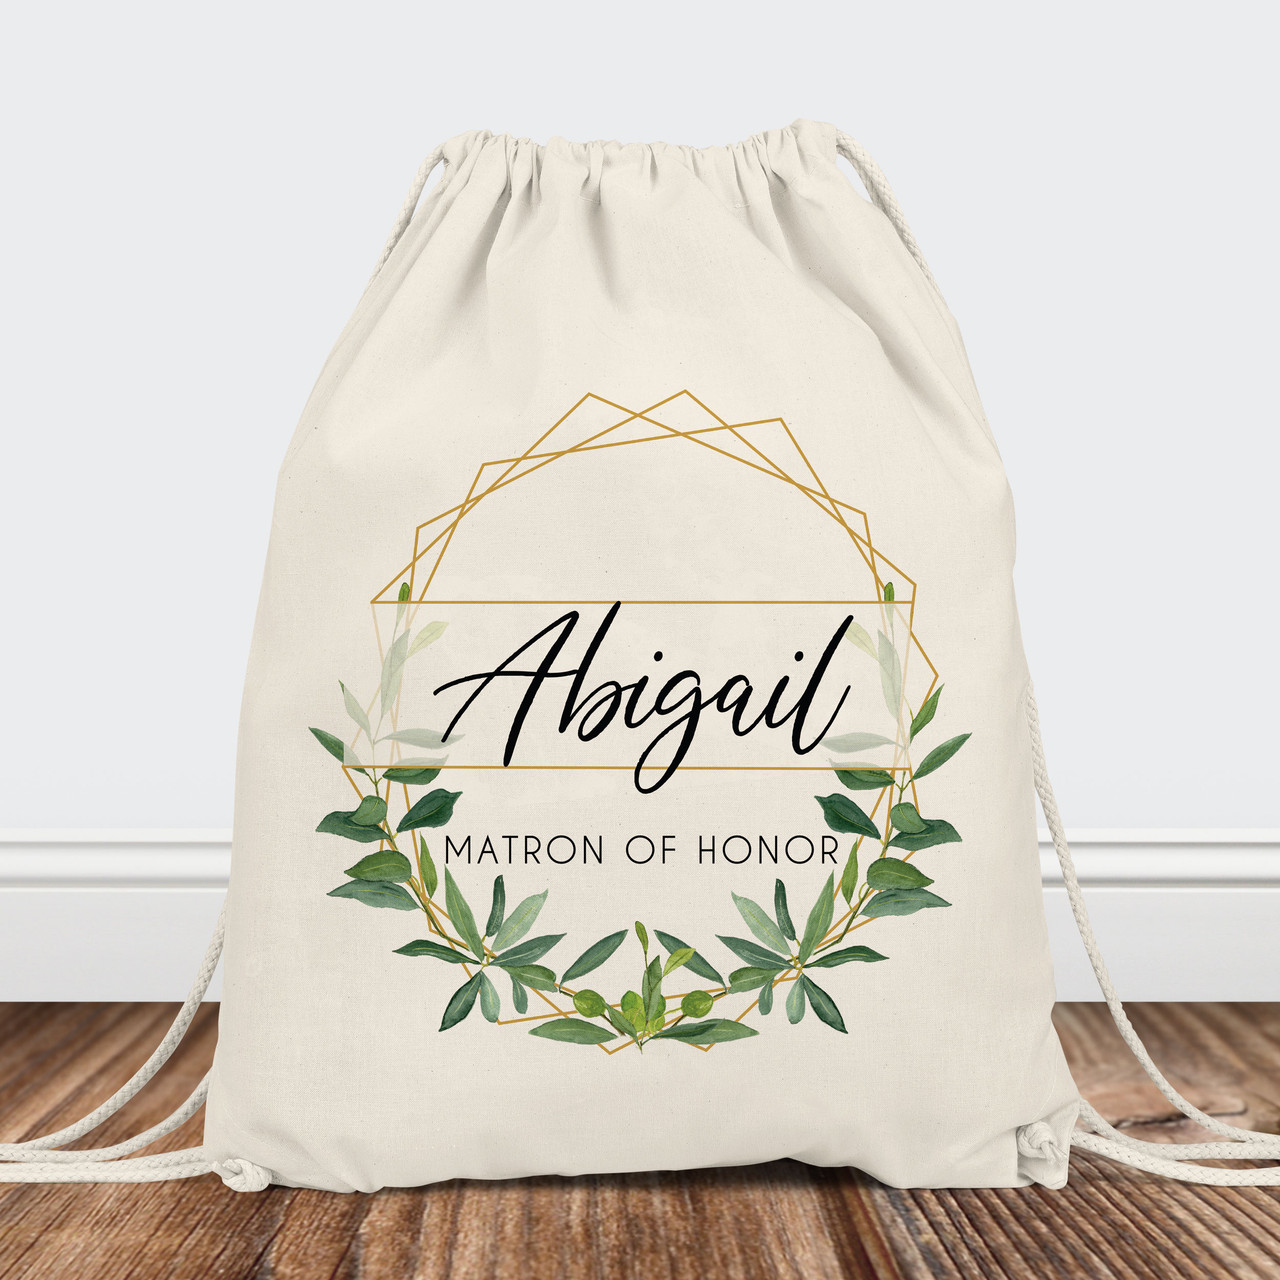 Personalized Bridal Babe Cotton Canvas Fabric Tote Bag With Gold Strap